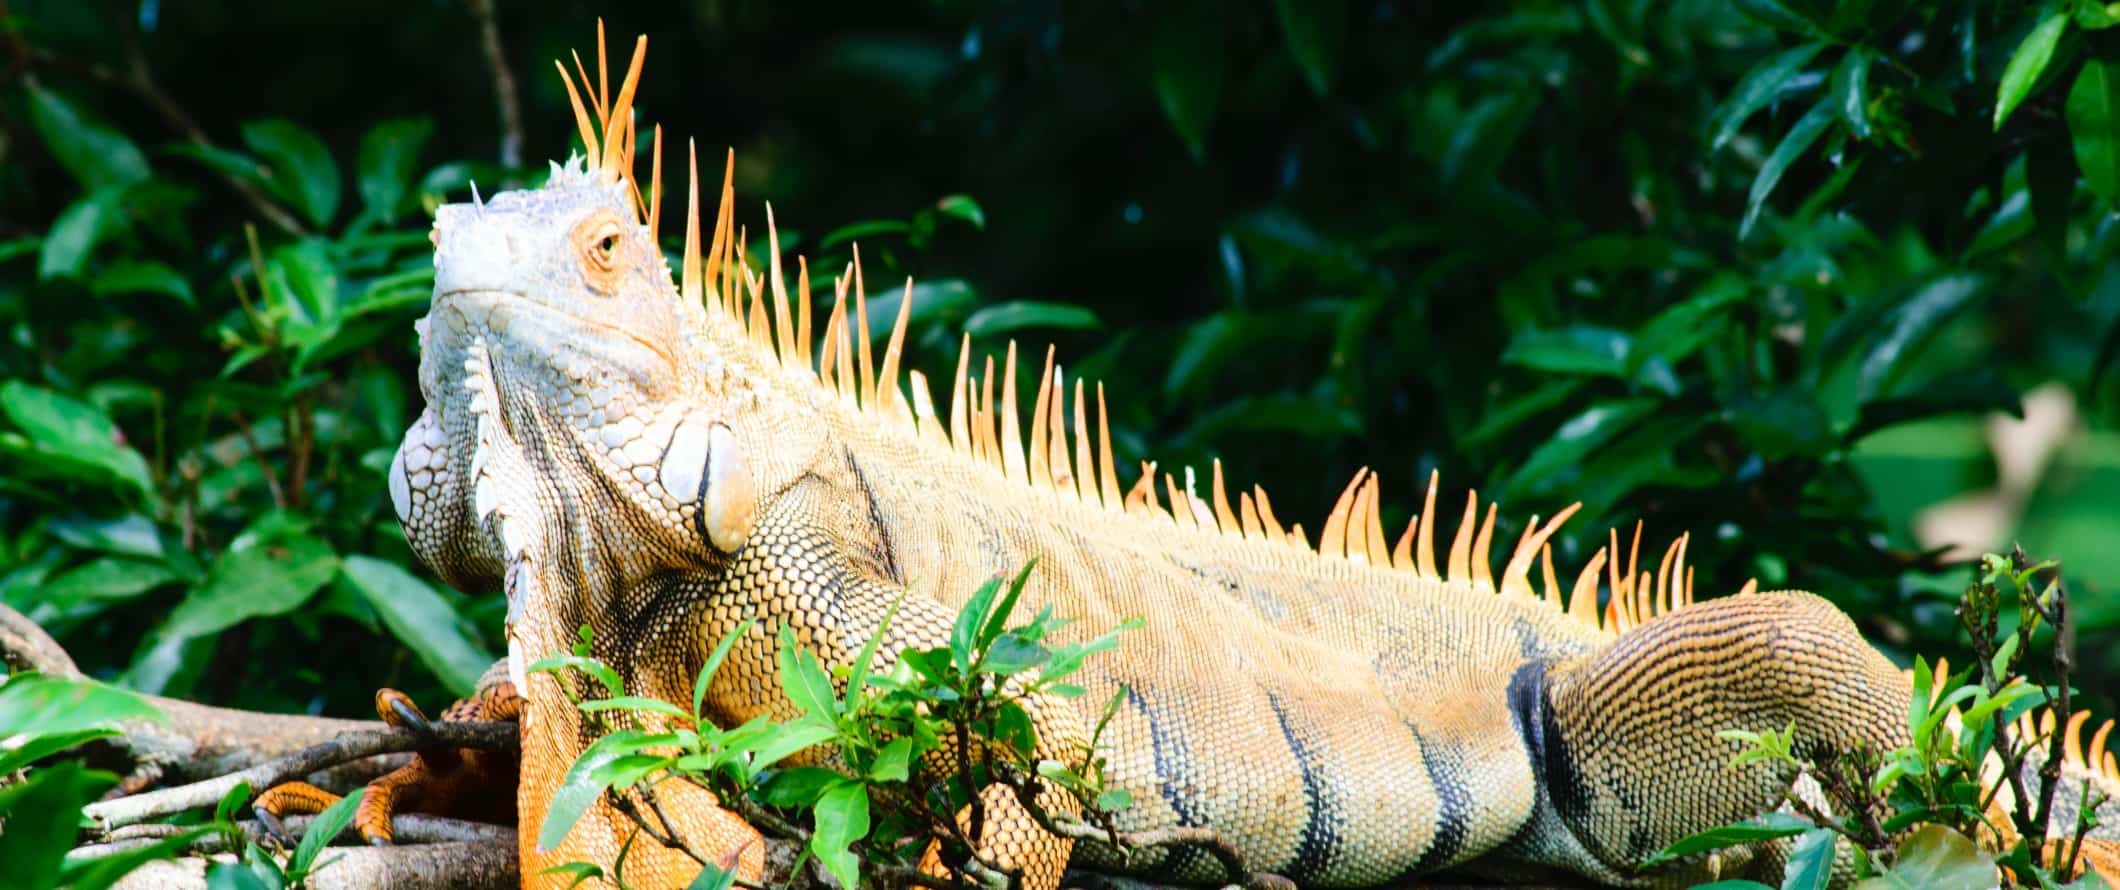 A large iguana lounging in the rainforests near Arenal, Costa Rica